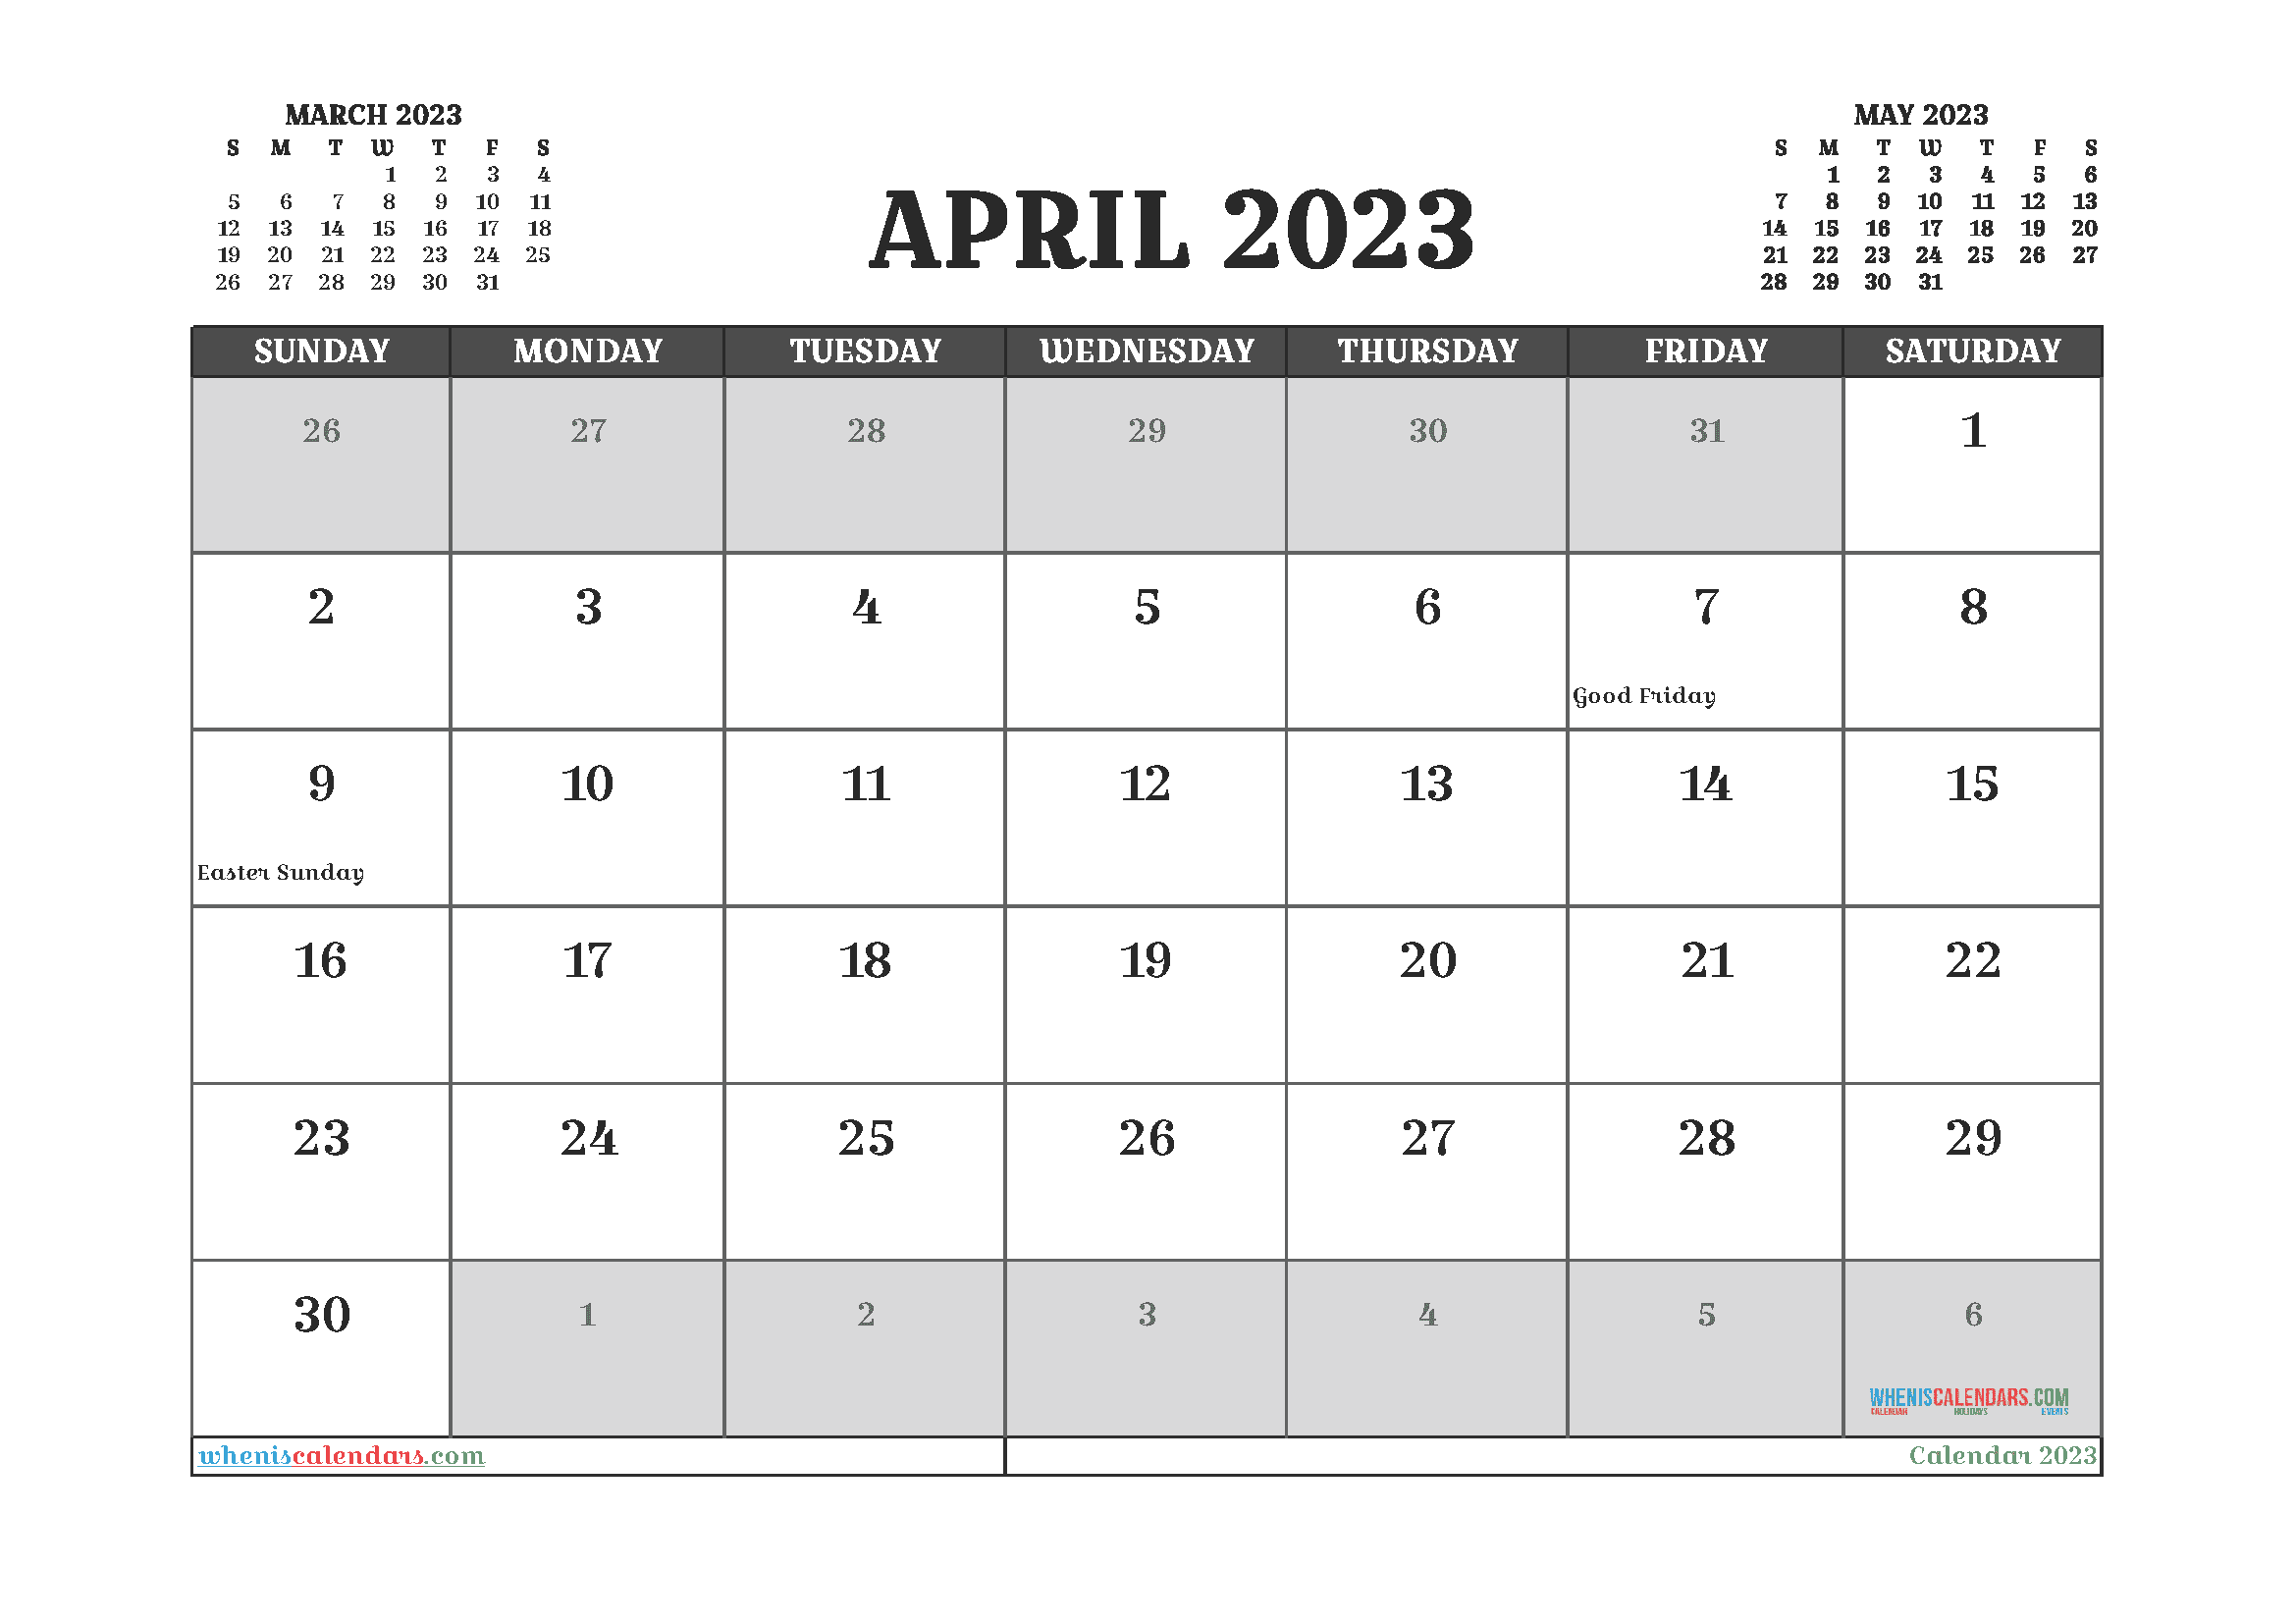 Free Printable Calendar April 2023 with Holidays PDF in Landscape